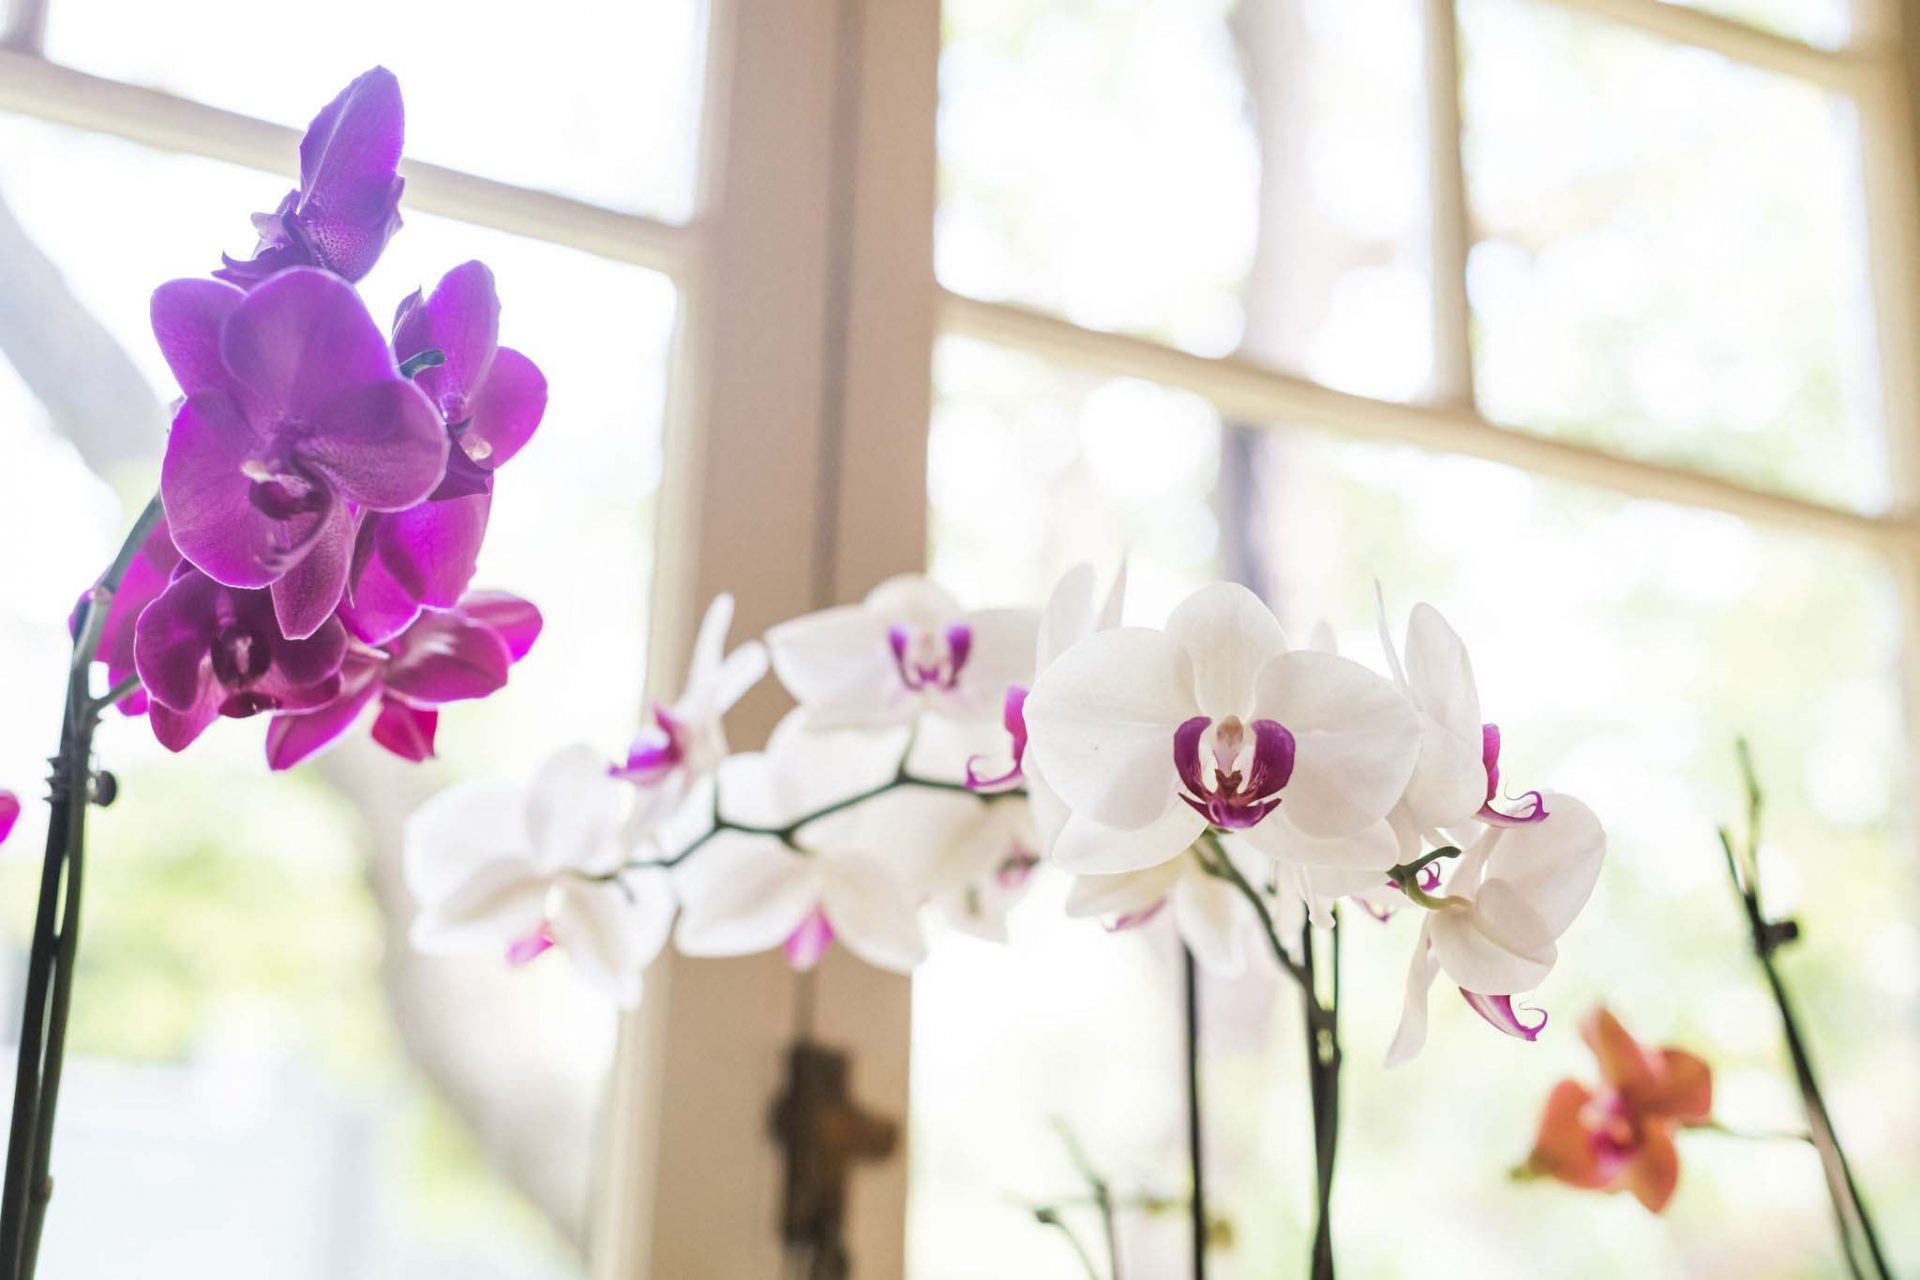 A close-up of purple and white orchids on the window sill of the sun room.